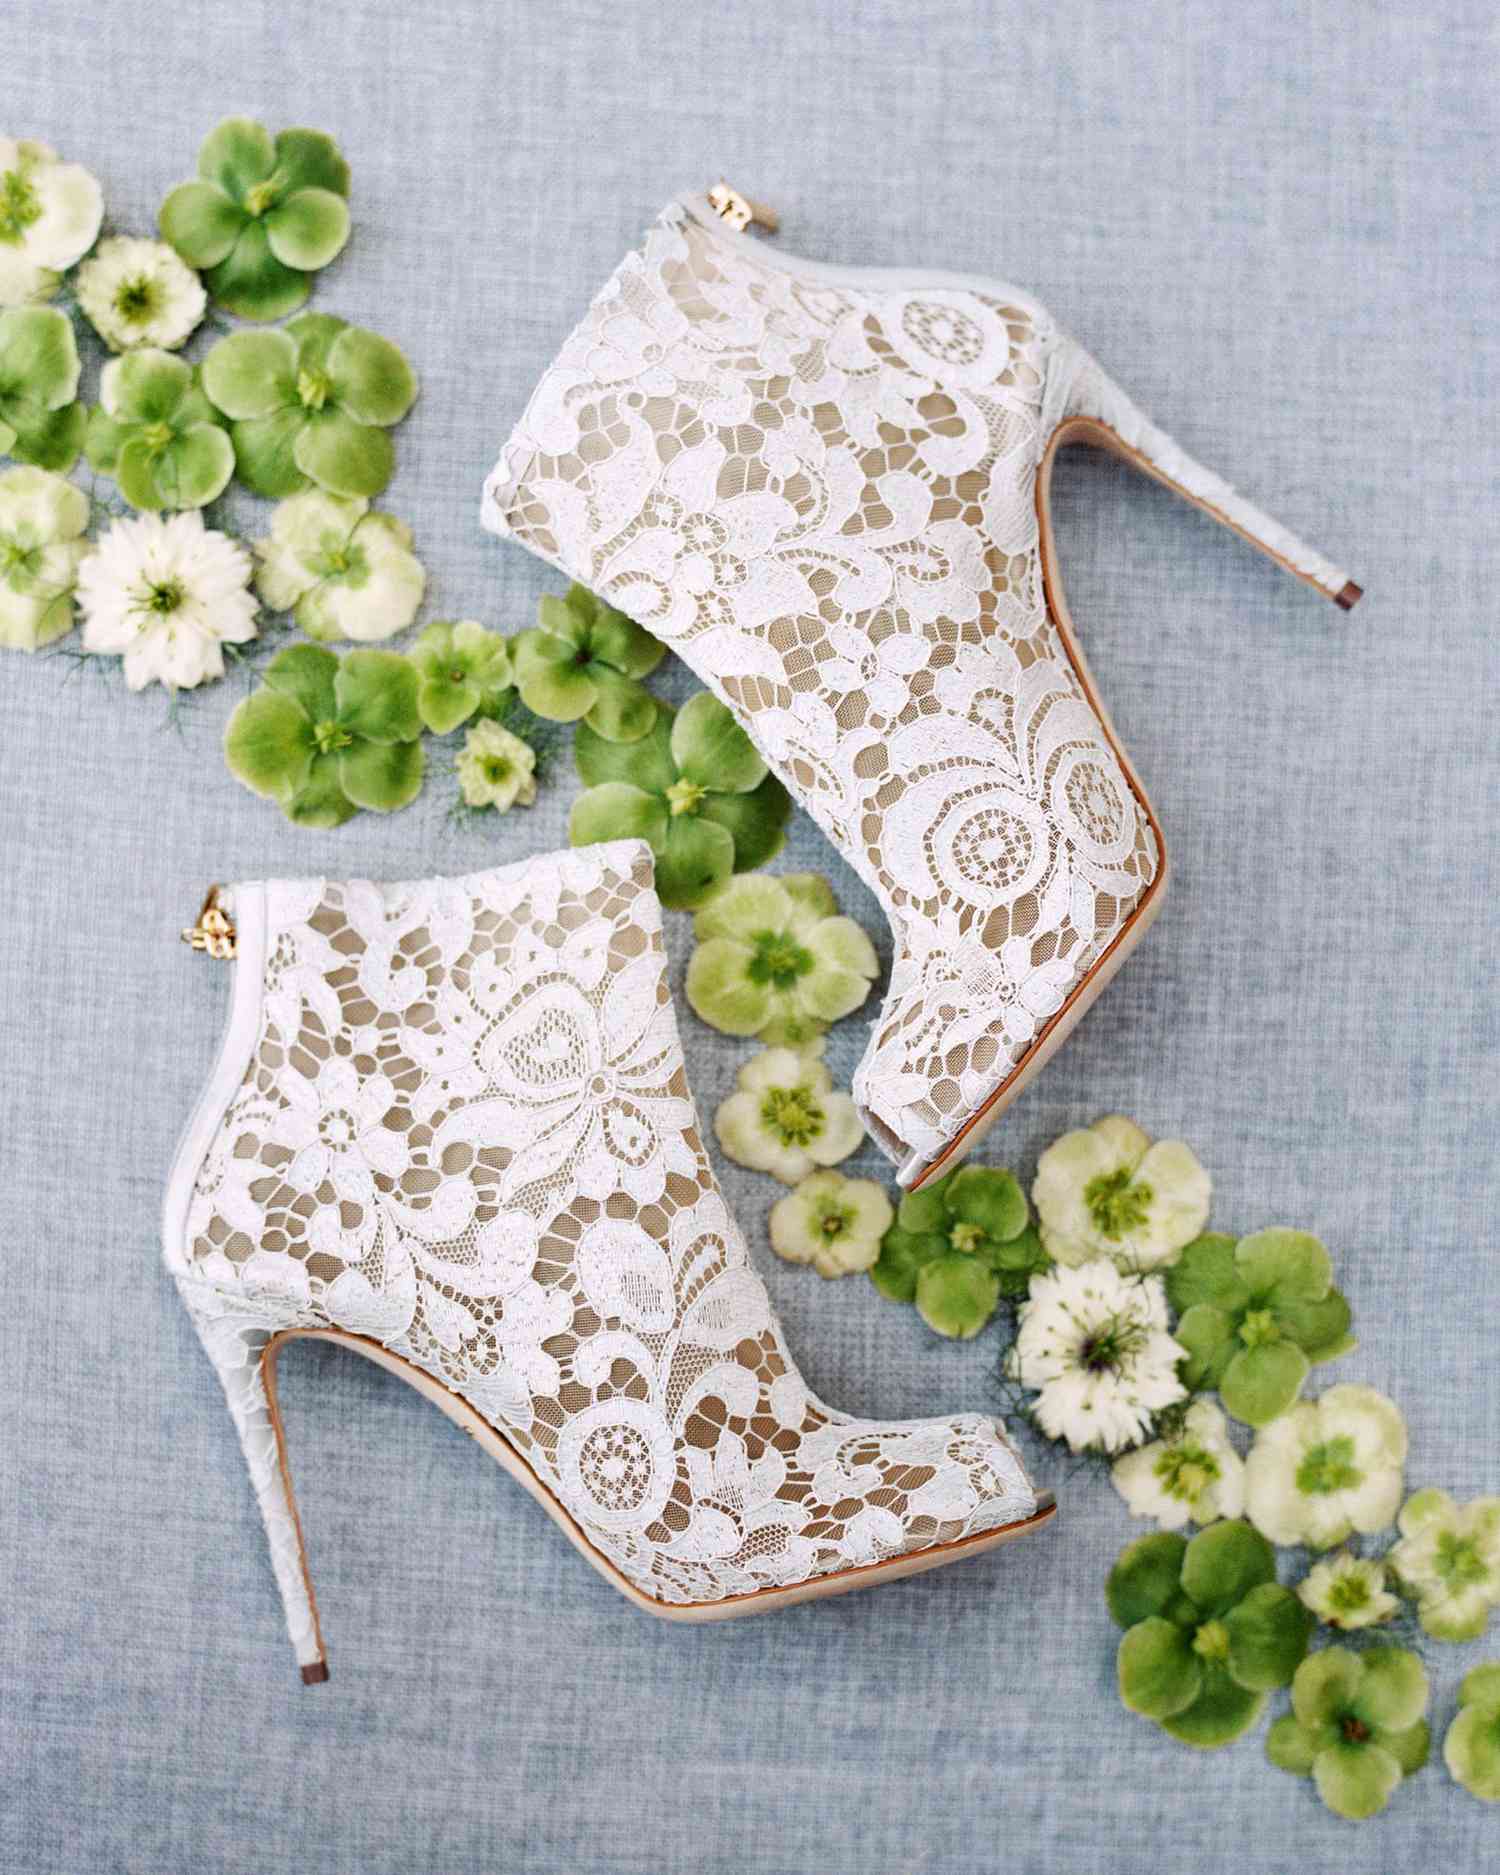 wedding ankle boots